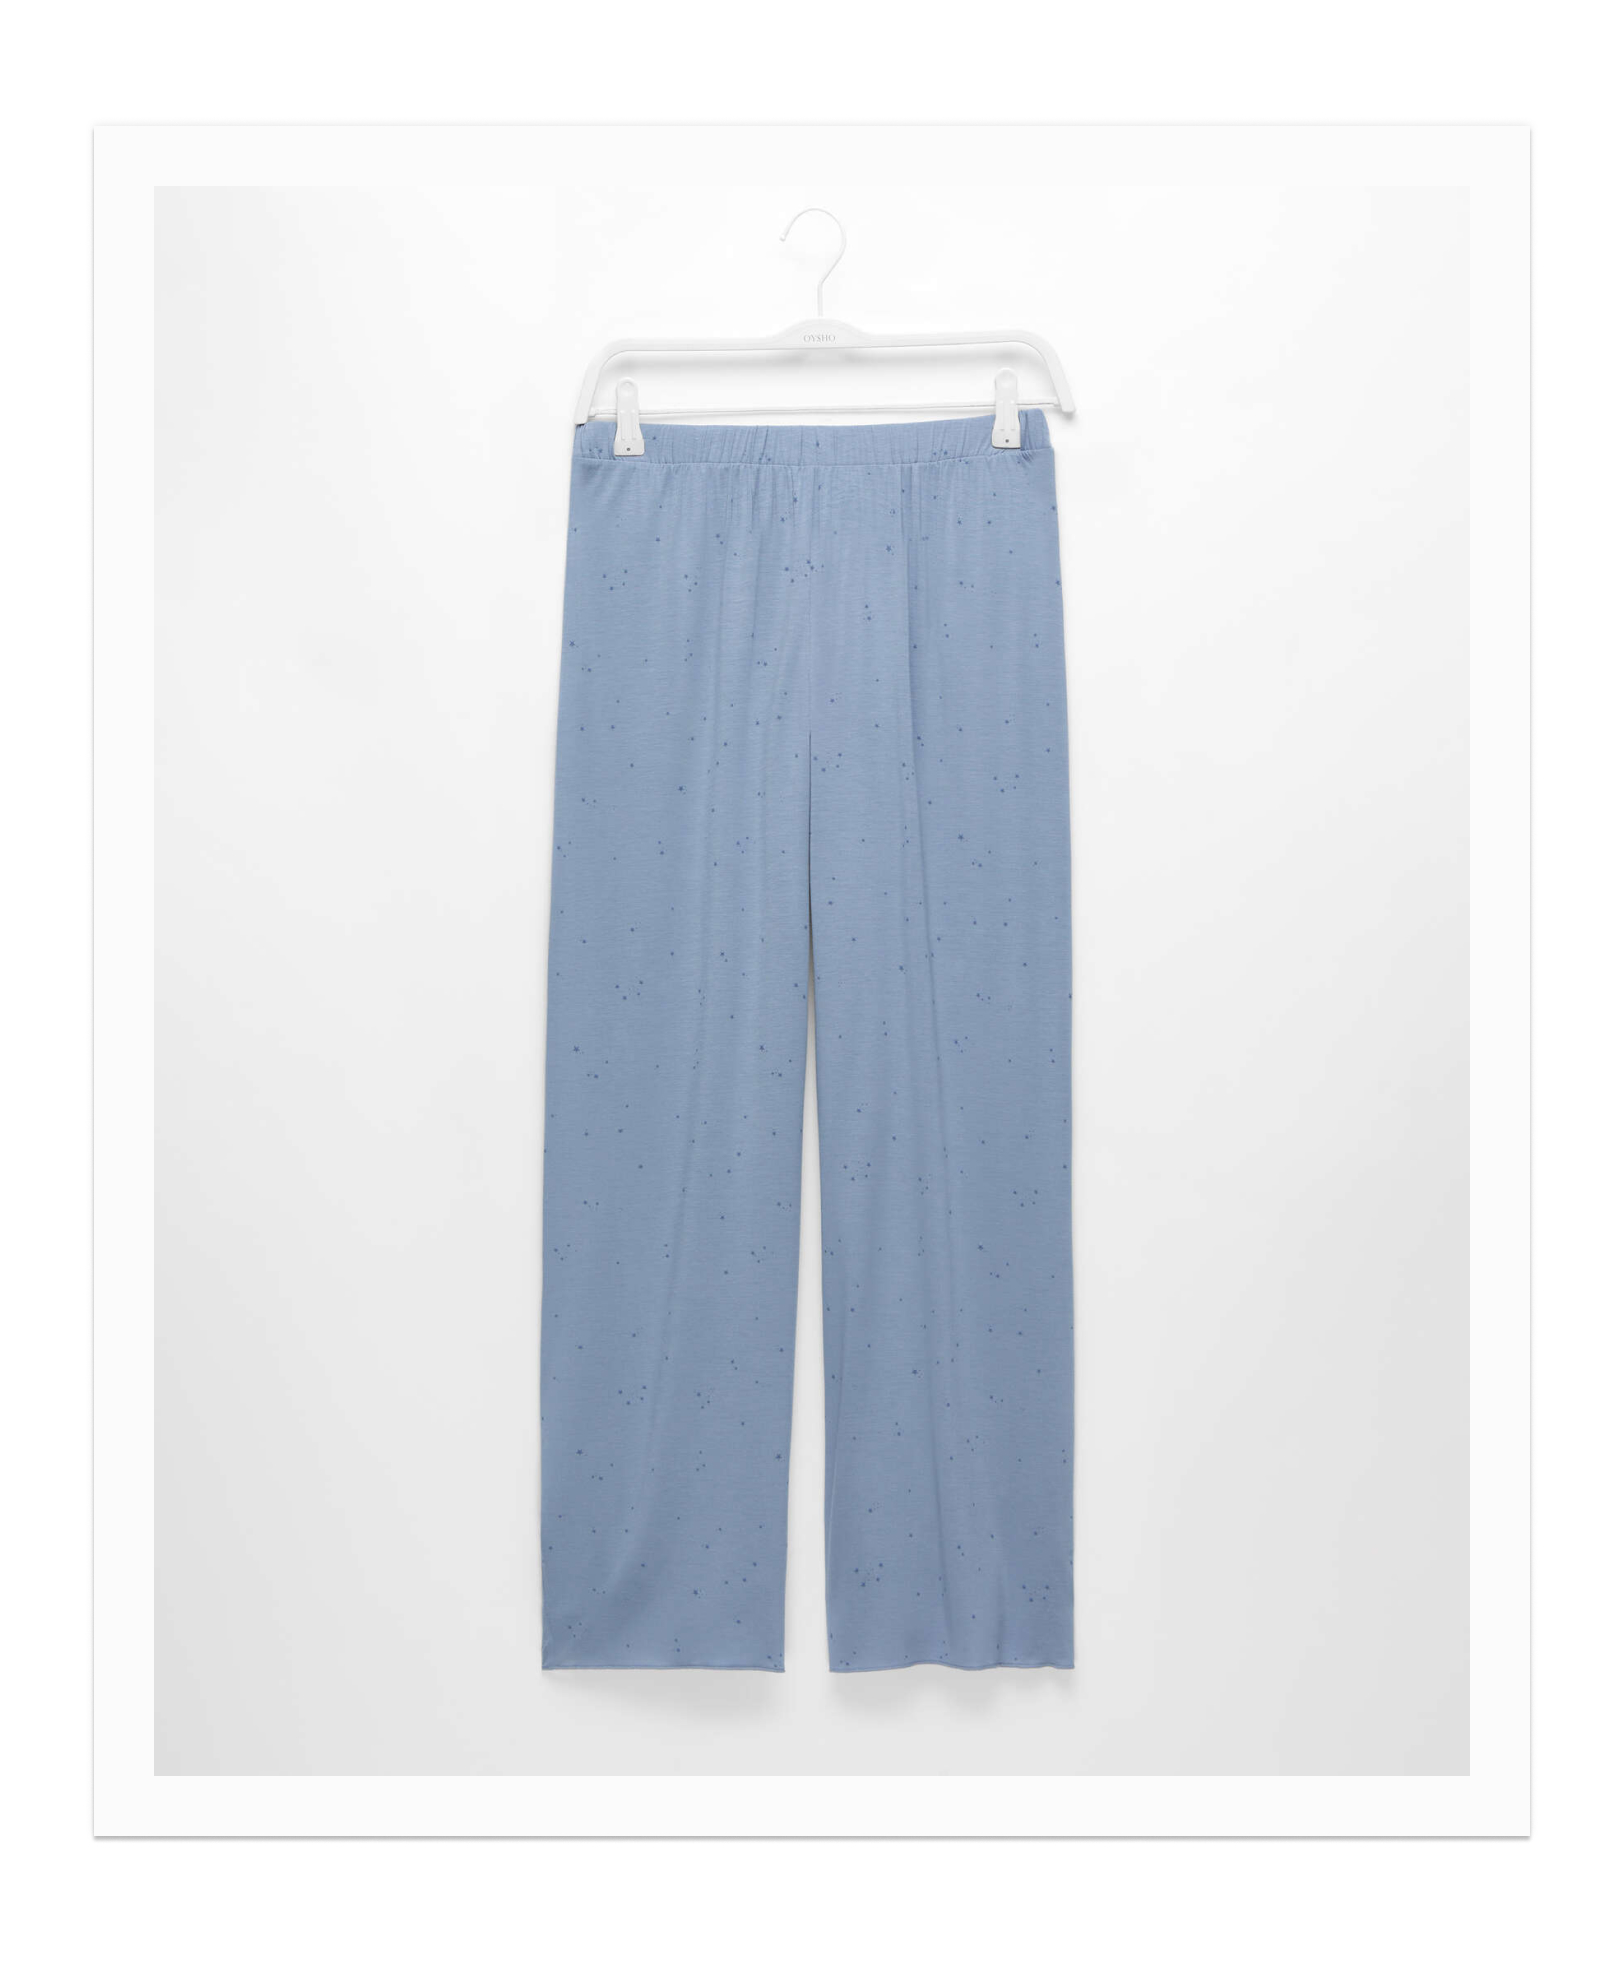 Ribbed micromodal culotte